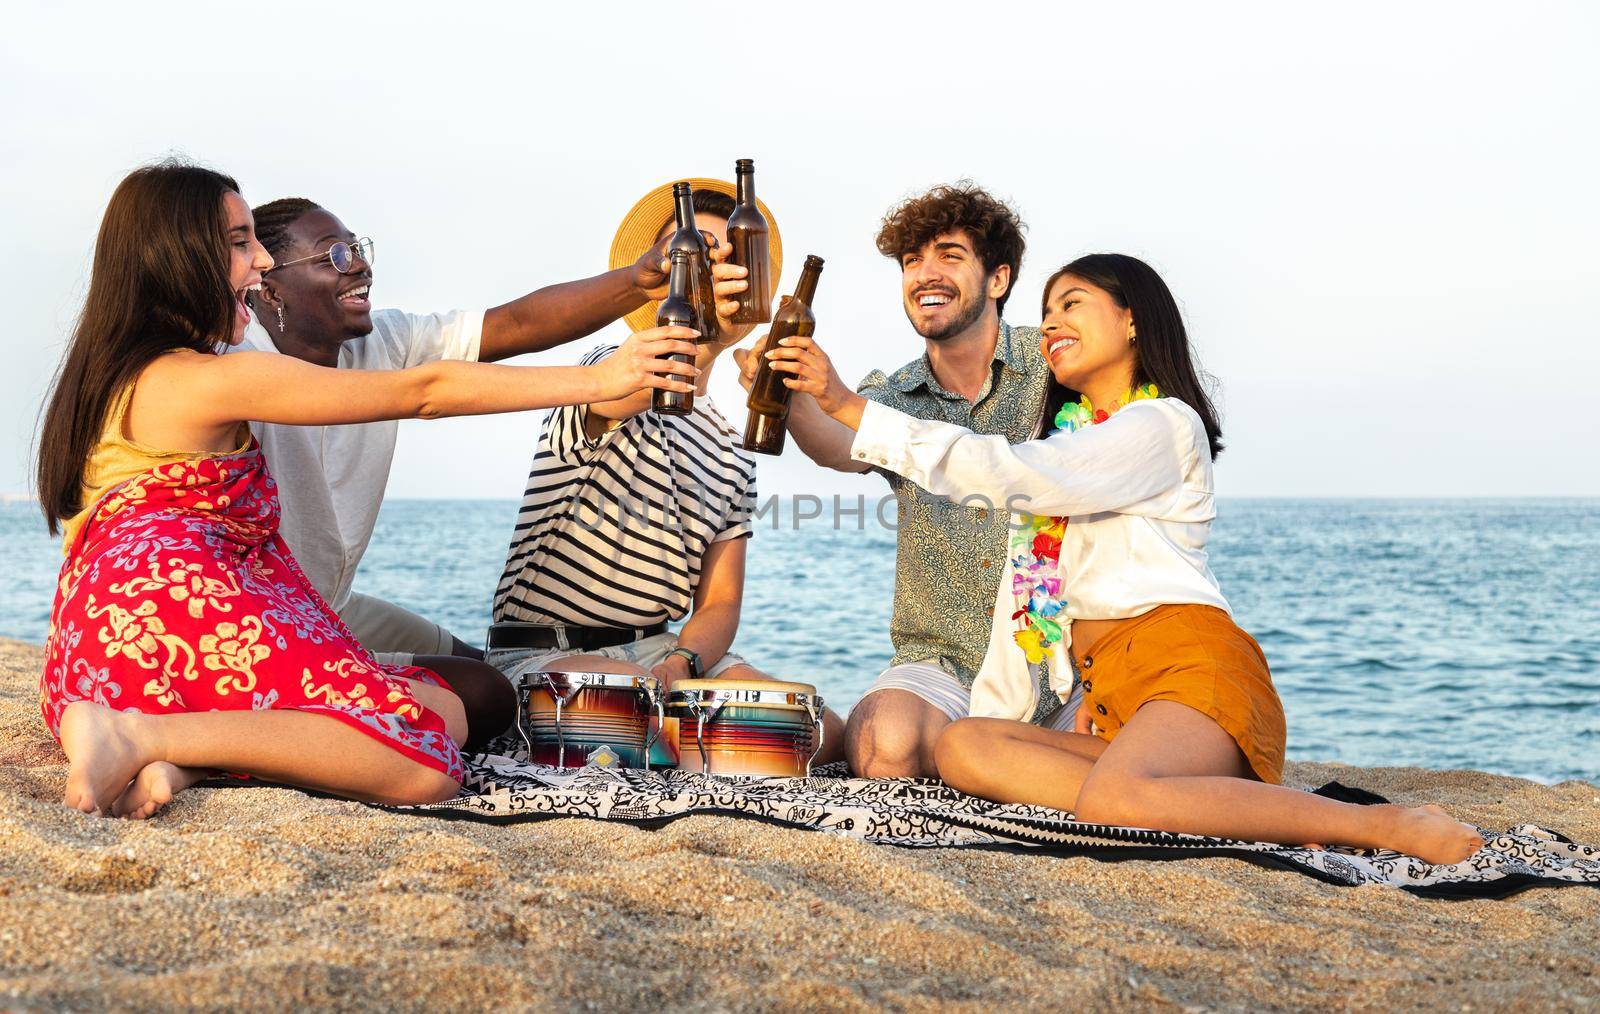 Happy, diverse group of friends toasting with beer together at the beach. Multiracial young people having fun outdoor. Vacation and friendship concept.